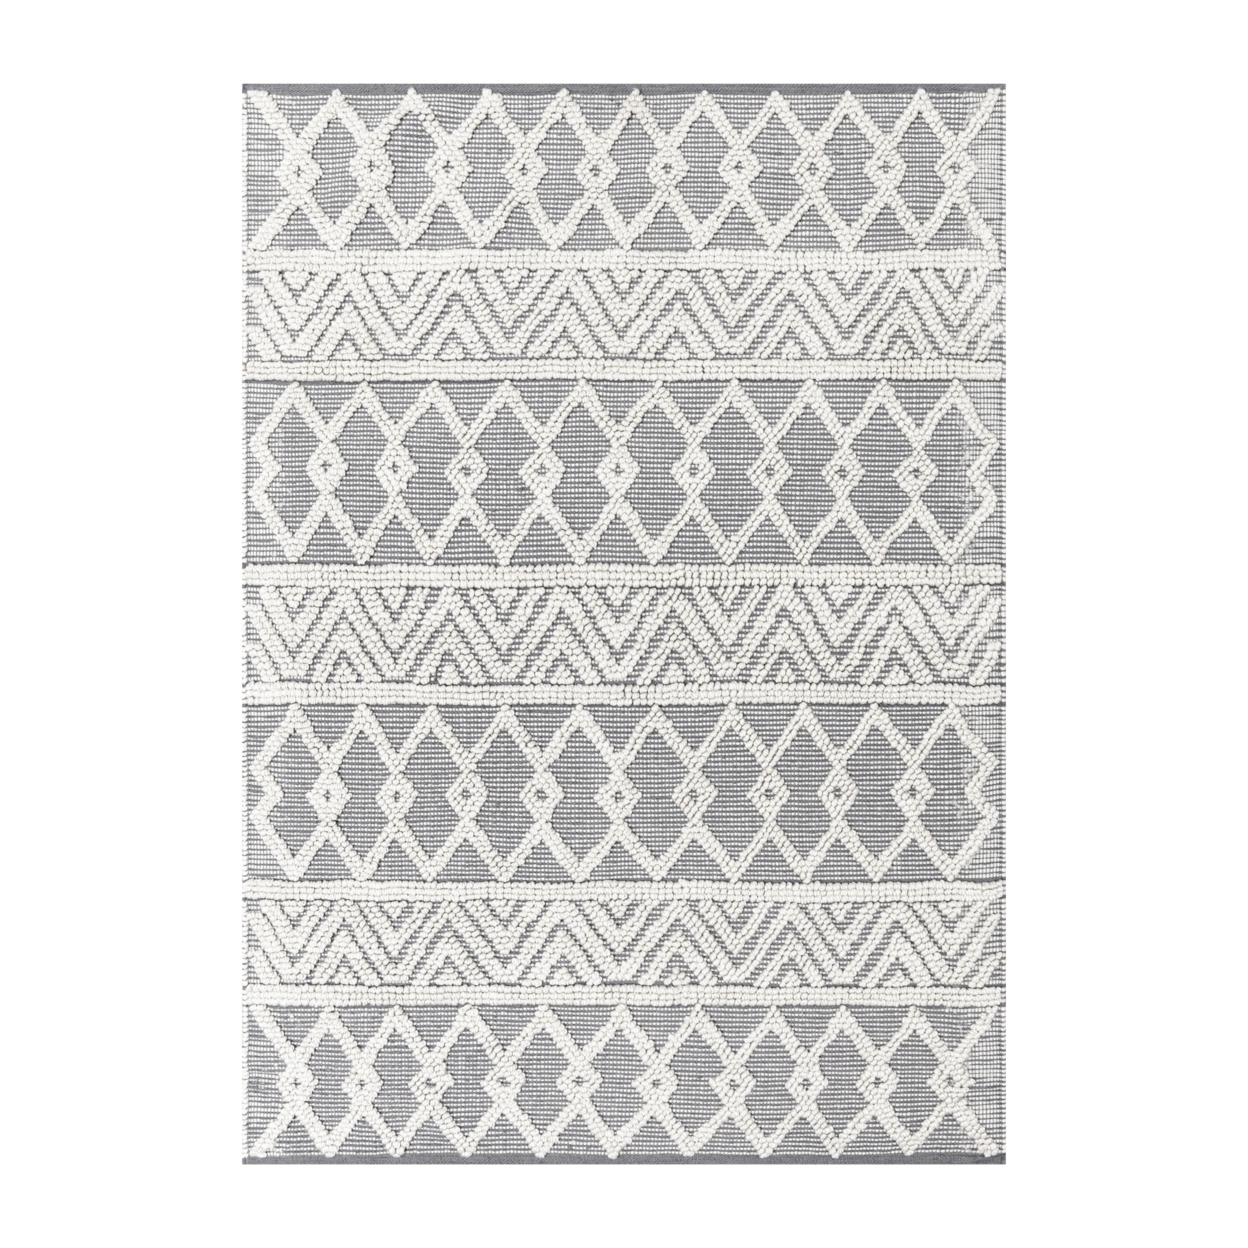 Indoor Geometric 5X7 Area Rug Hand Woven Gray Area Rug With Ivory Diamond Pattern, Polyestercotton Blend